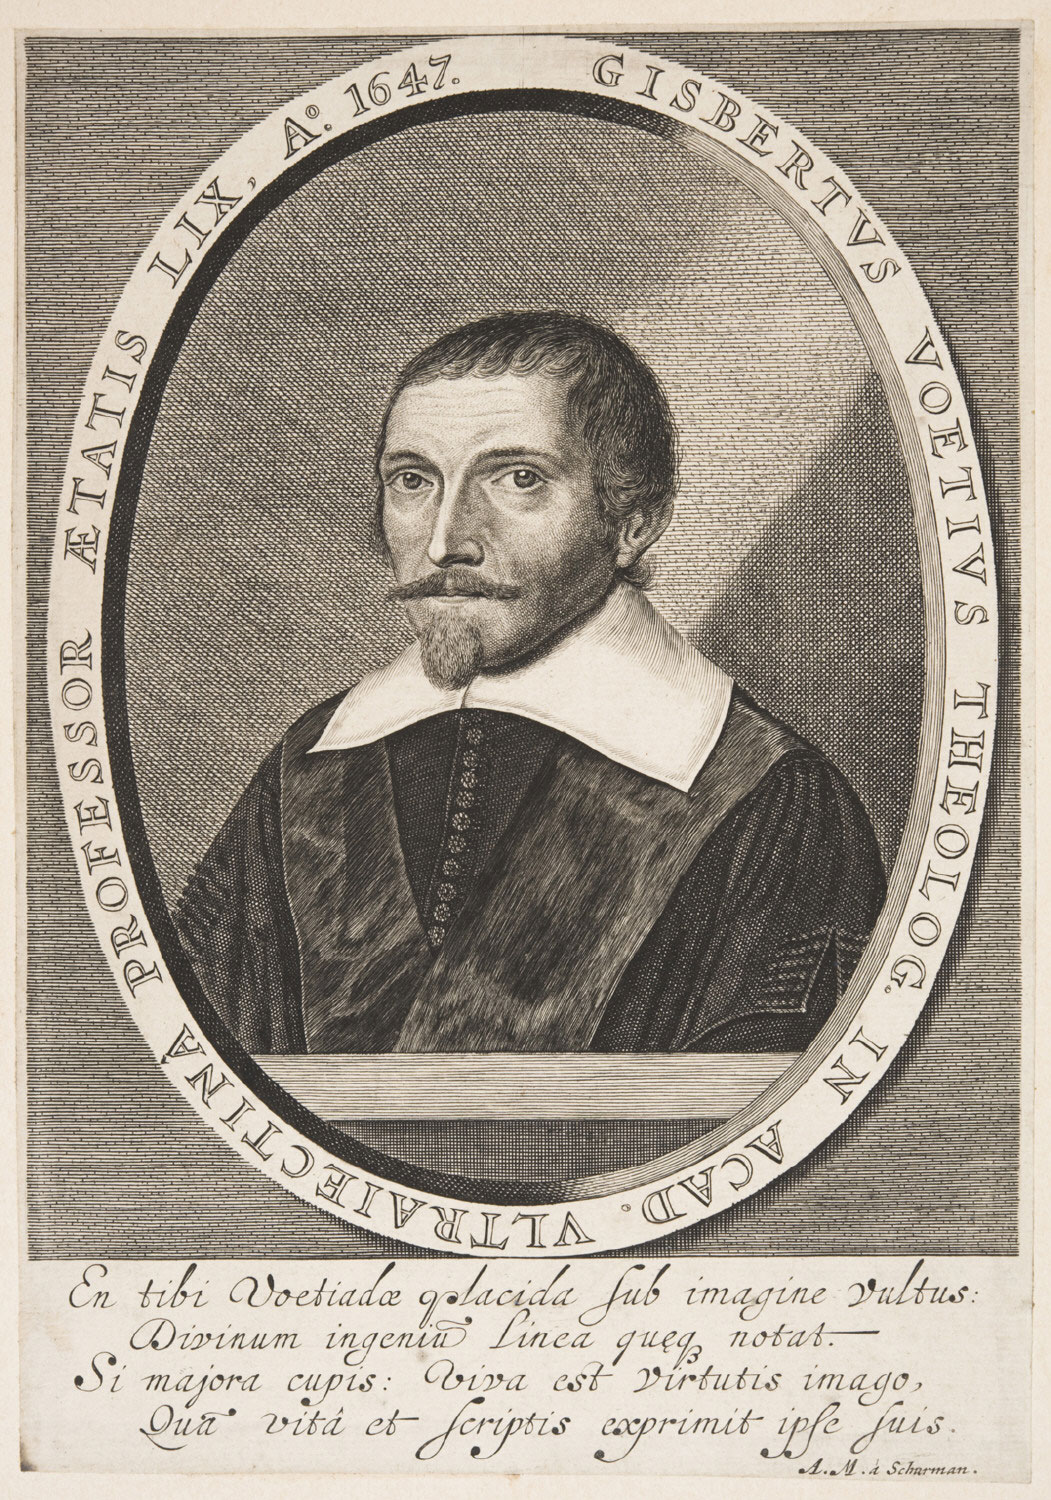 A bust-length, oval portrait of a man in seventeenth-century clothing with an oversized white collar. He looks out directly with a serious expression. His hair is combed forward, and he has a beard and a thin mustache. There is an inscription around the oval and another at the bottom of the page.